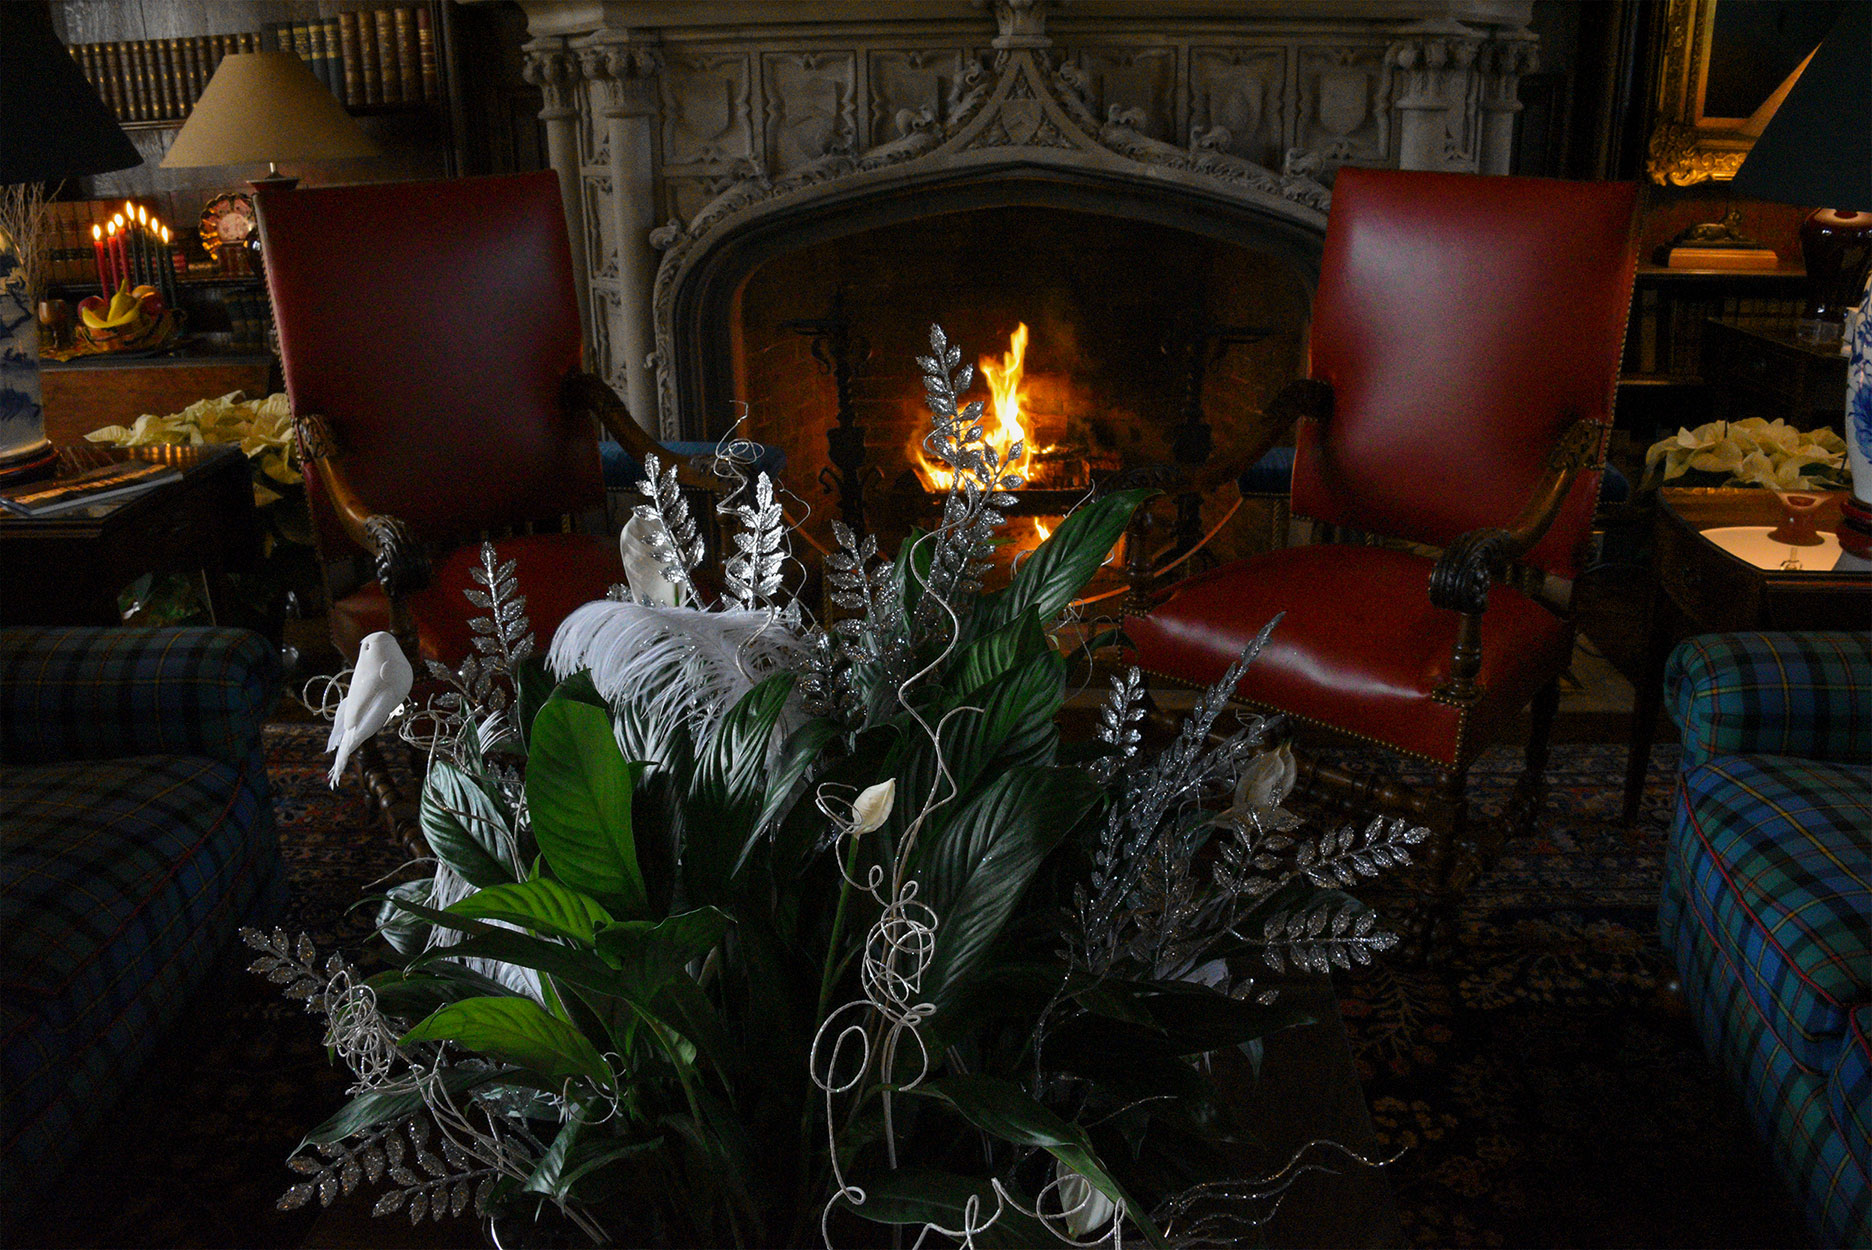 A cozy fire framed by leather chairs in the Library with a centerpiece of white orchids and peace lilies in the foreground. Library Decor by the Allentown Garden Club.